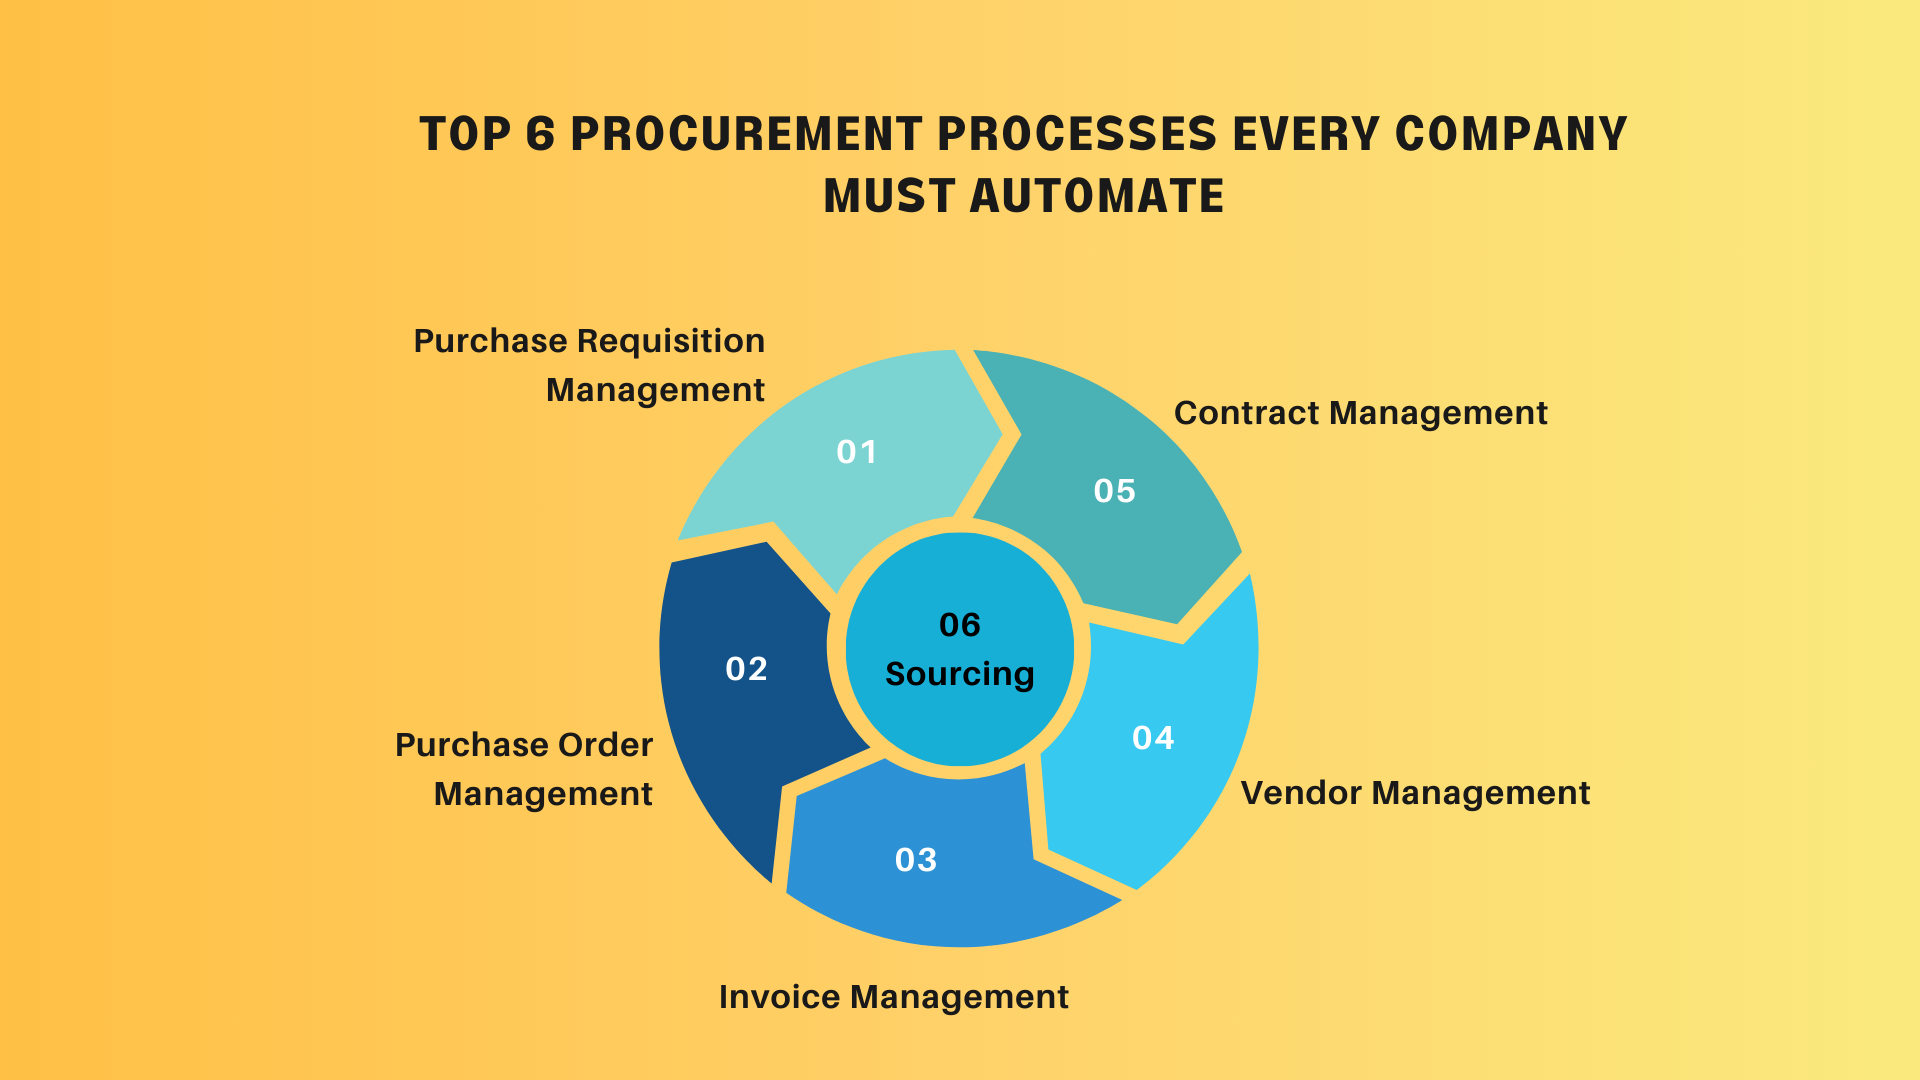 Top 6 Procurement Processes Every Company Must Automate